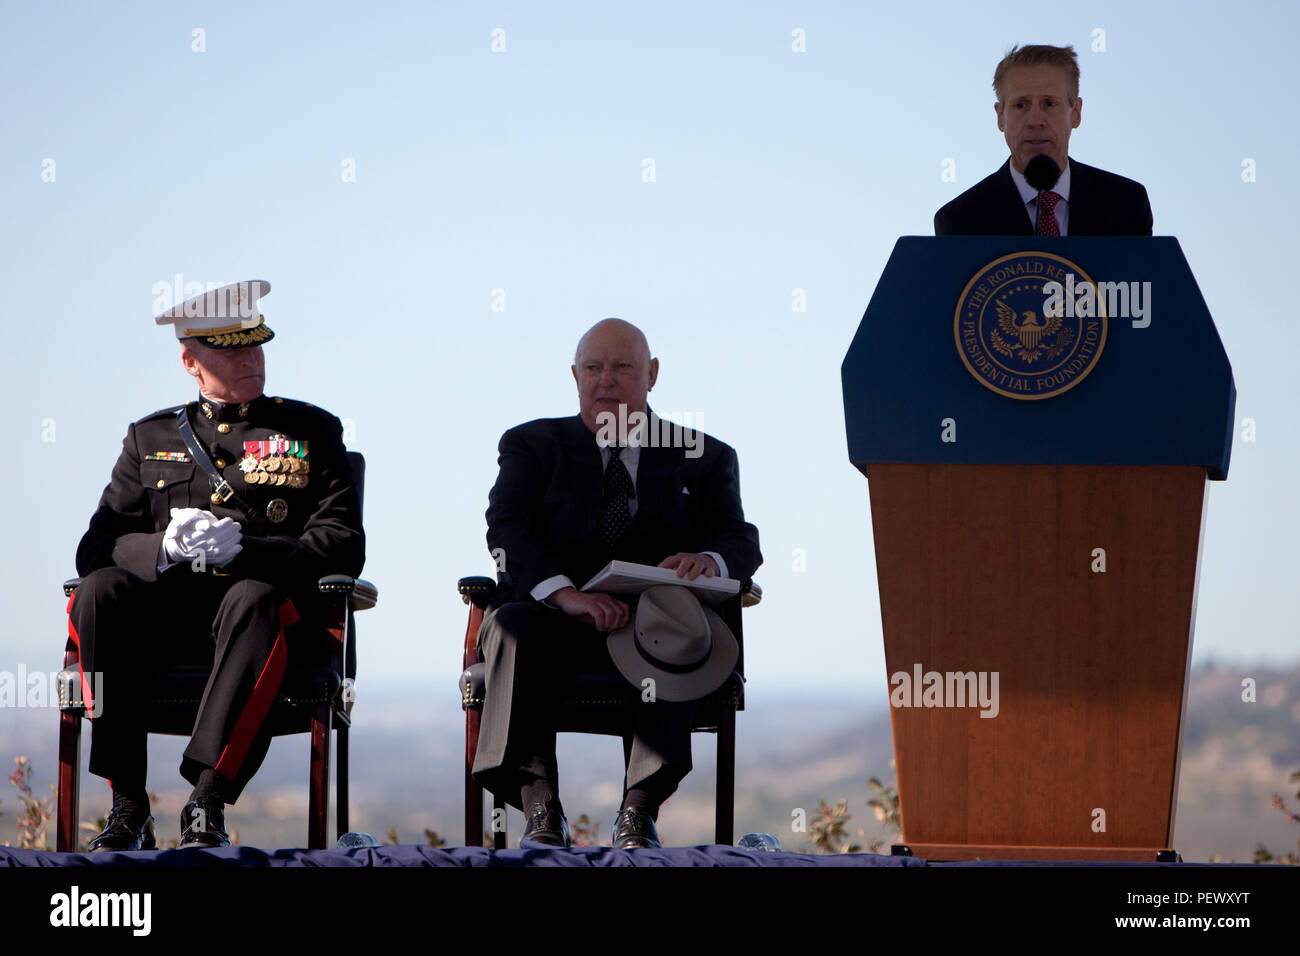 Mr. John Heubusch, executive director of the Ronald Reagan Presidential Foundation, speaks to the guests at the President Ronald Reagan wreath laying ceremony, at the Ronald Reagan Presidential Foundation and Library, Simi Valley, Calif., Feb. 6, 2016. The purpose of this ceremony is to honor the 105th Anniversary of his birth and pay tribute to his distinguished service to a grateful nation. (U.S. Marine Corps photo by Cpl. Brian Bekkala/MCIWEST-MCB CamPen Combat Camera/Released) Stock Photo